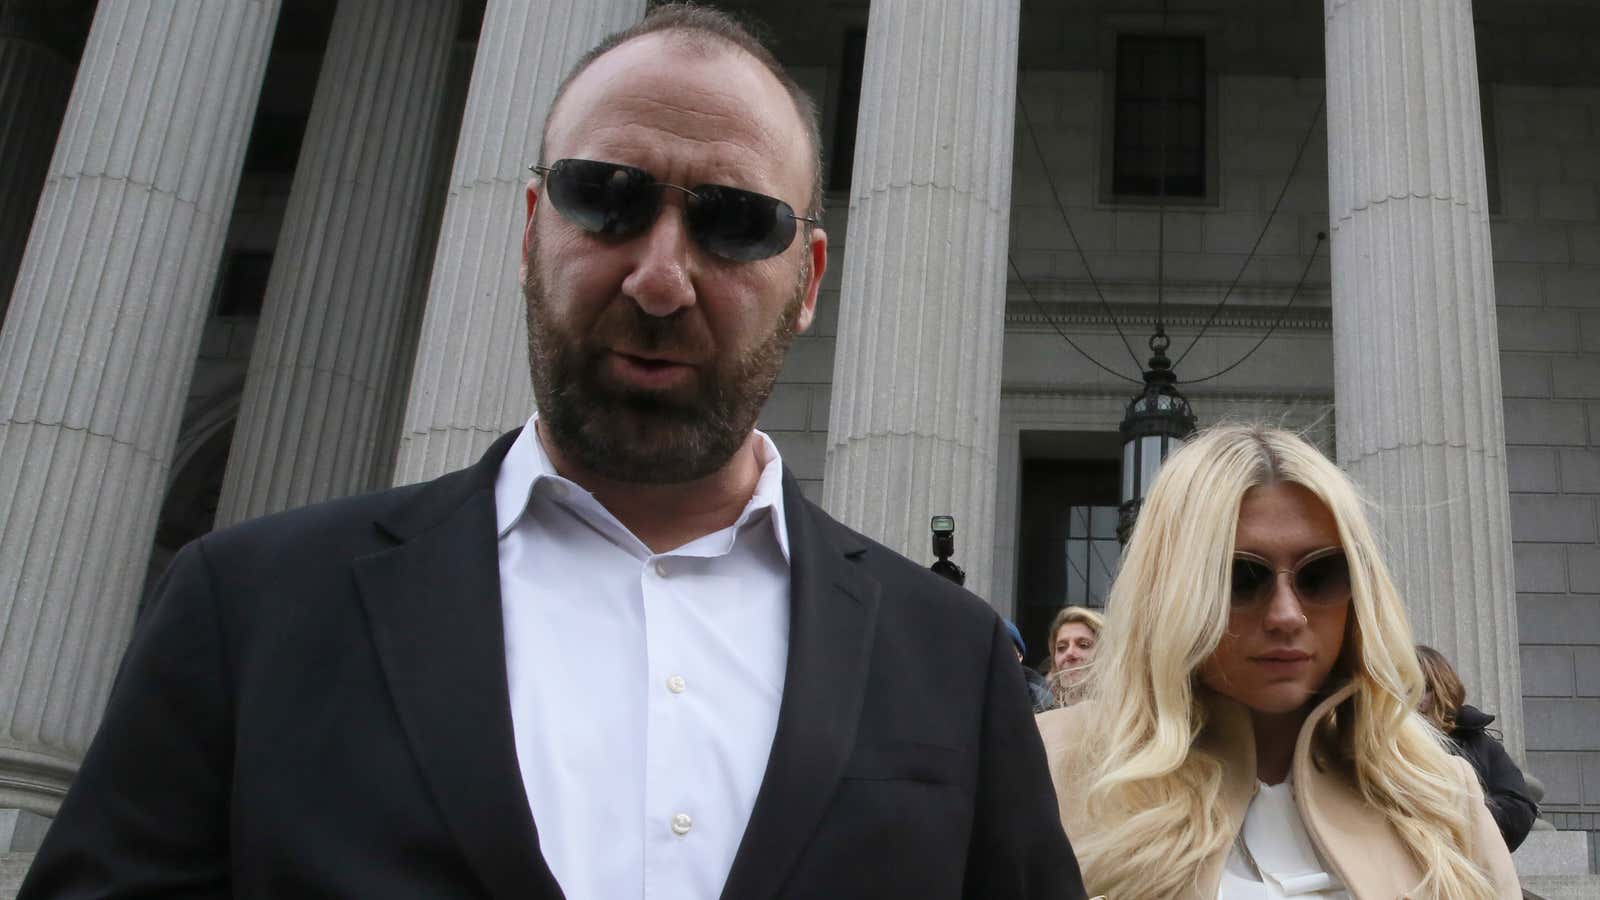 Kesha’s case is exposing crucial gaps in contract law.